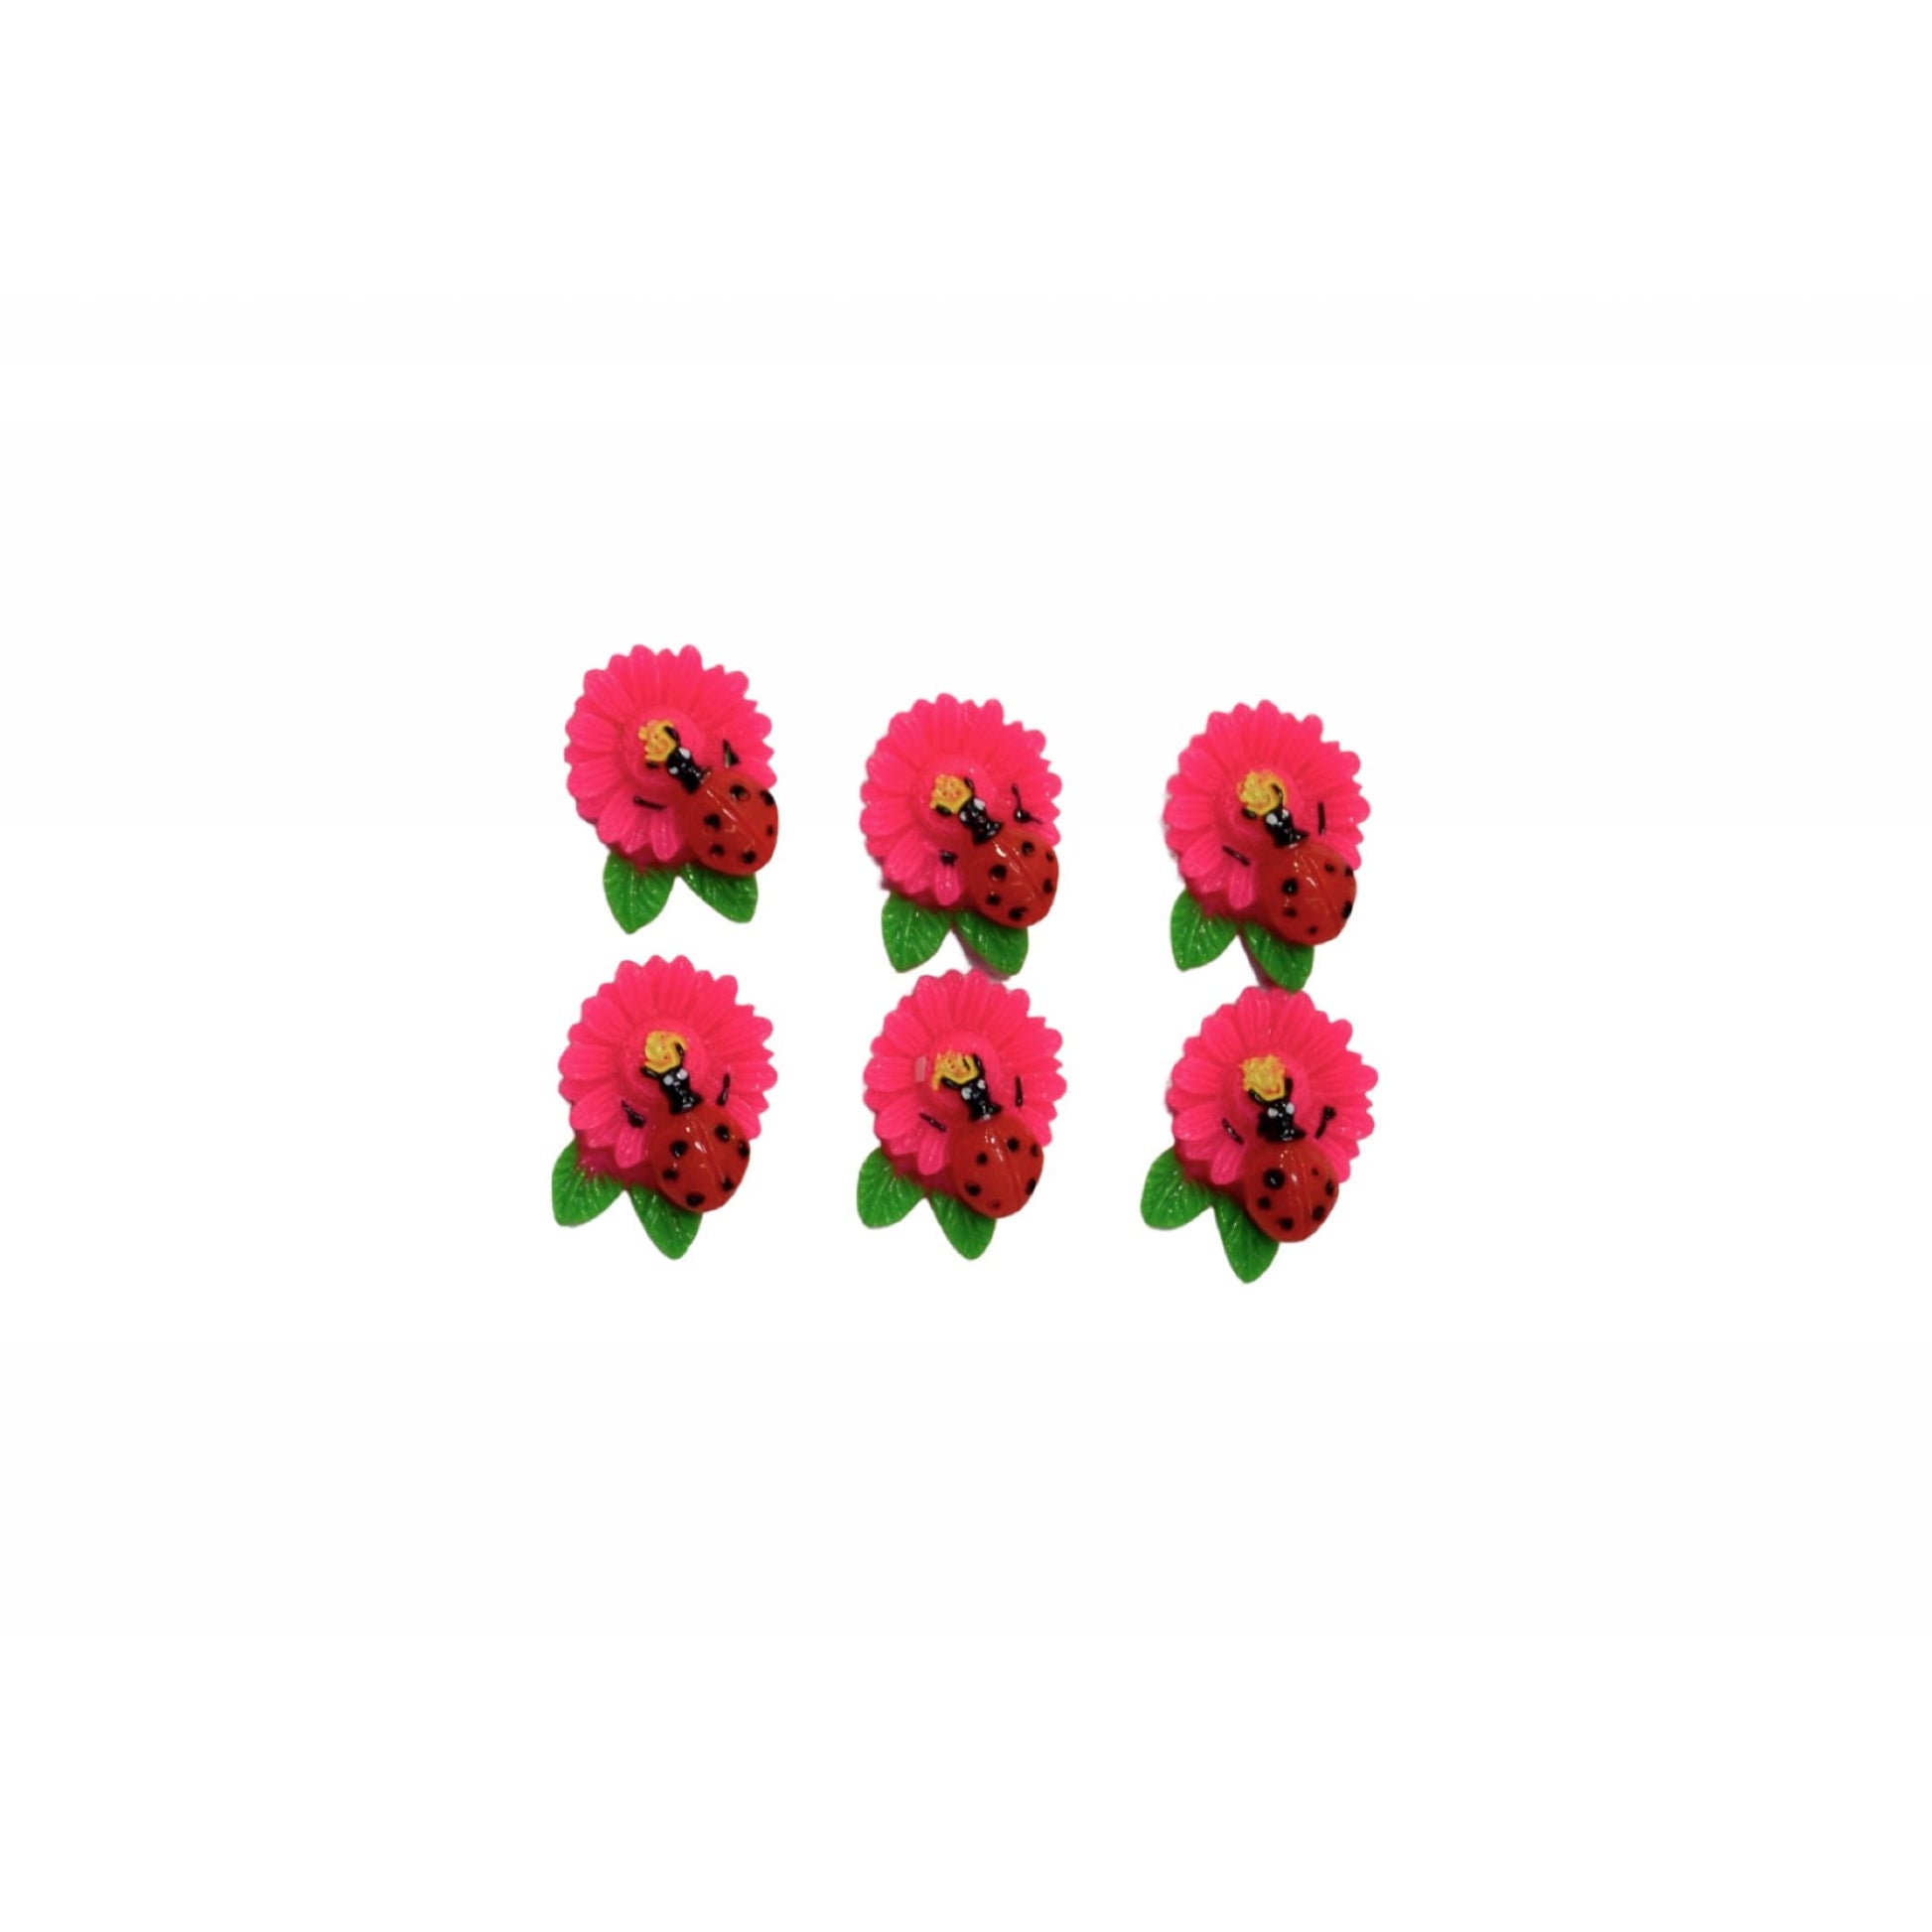 Indian Petals Flat-back Resin Flower with a Beetle Cabochons Motif for Craft Decoration or Rakhi - 12448, Hot Pink